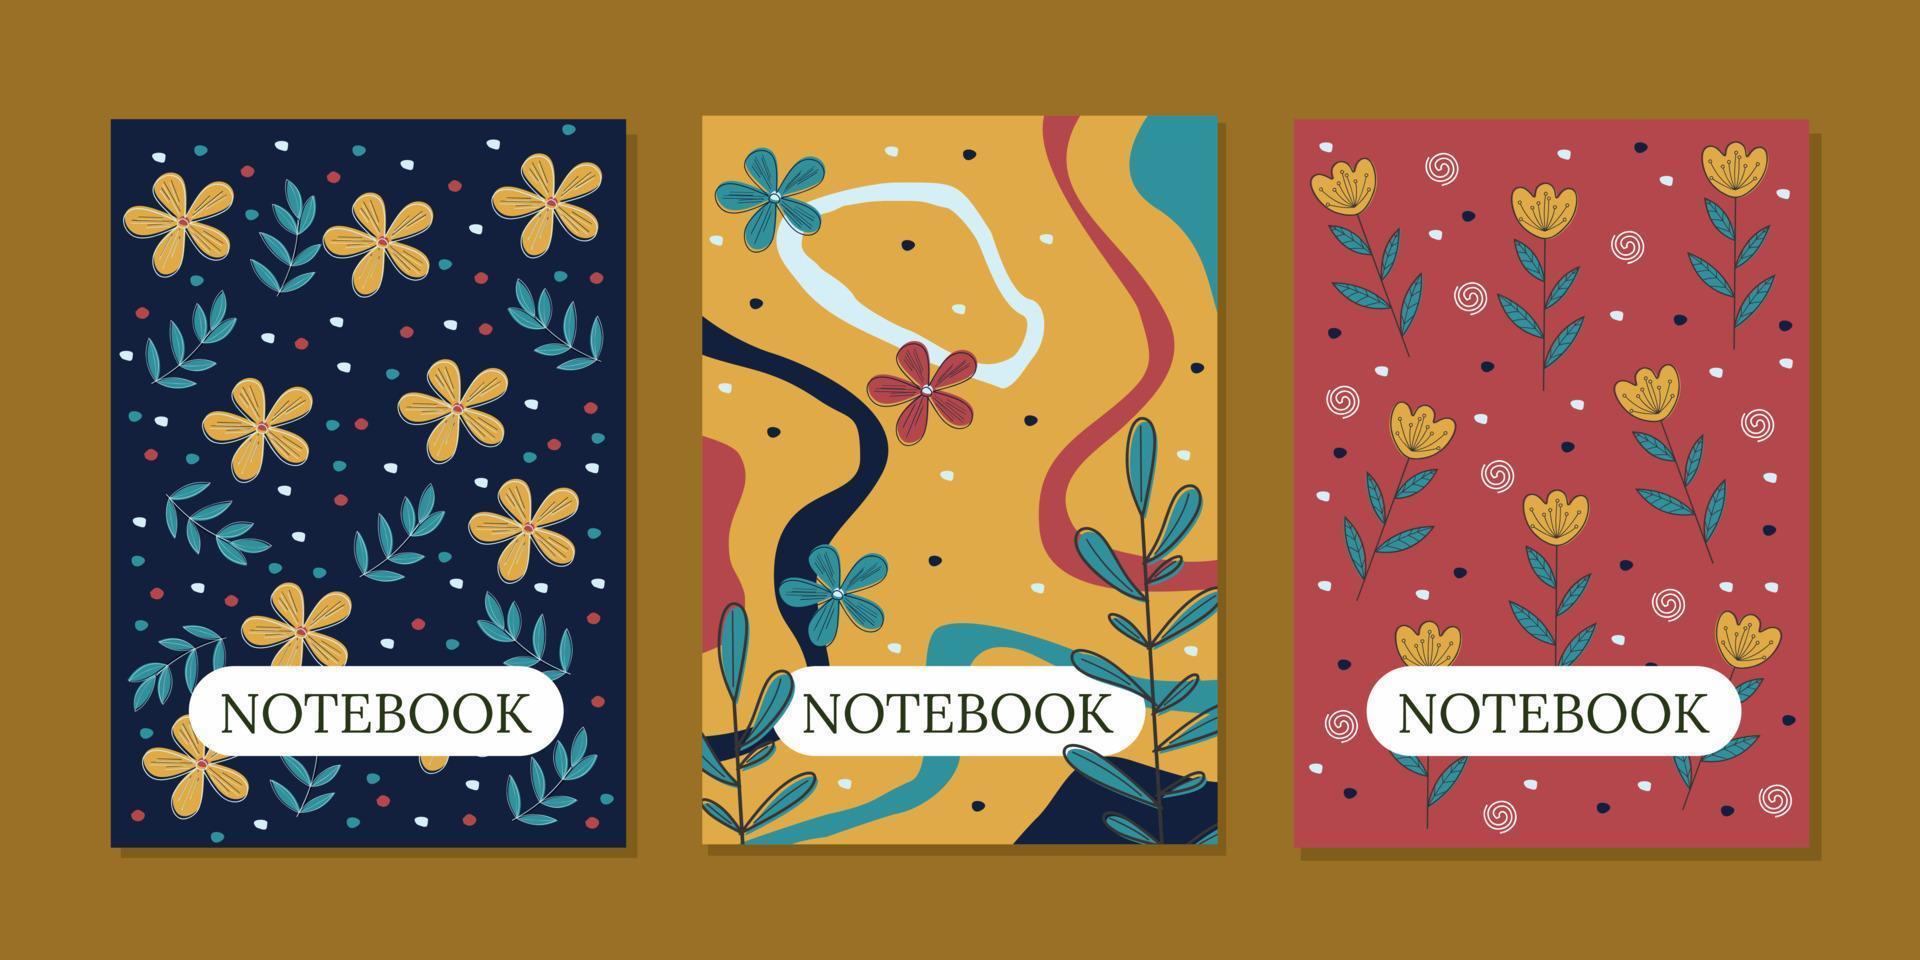 hand drawn floral pattern book covers set. beautiful and cute design. A4 size For notebooks, planners, invitation, books, catalogs vector